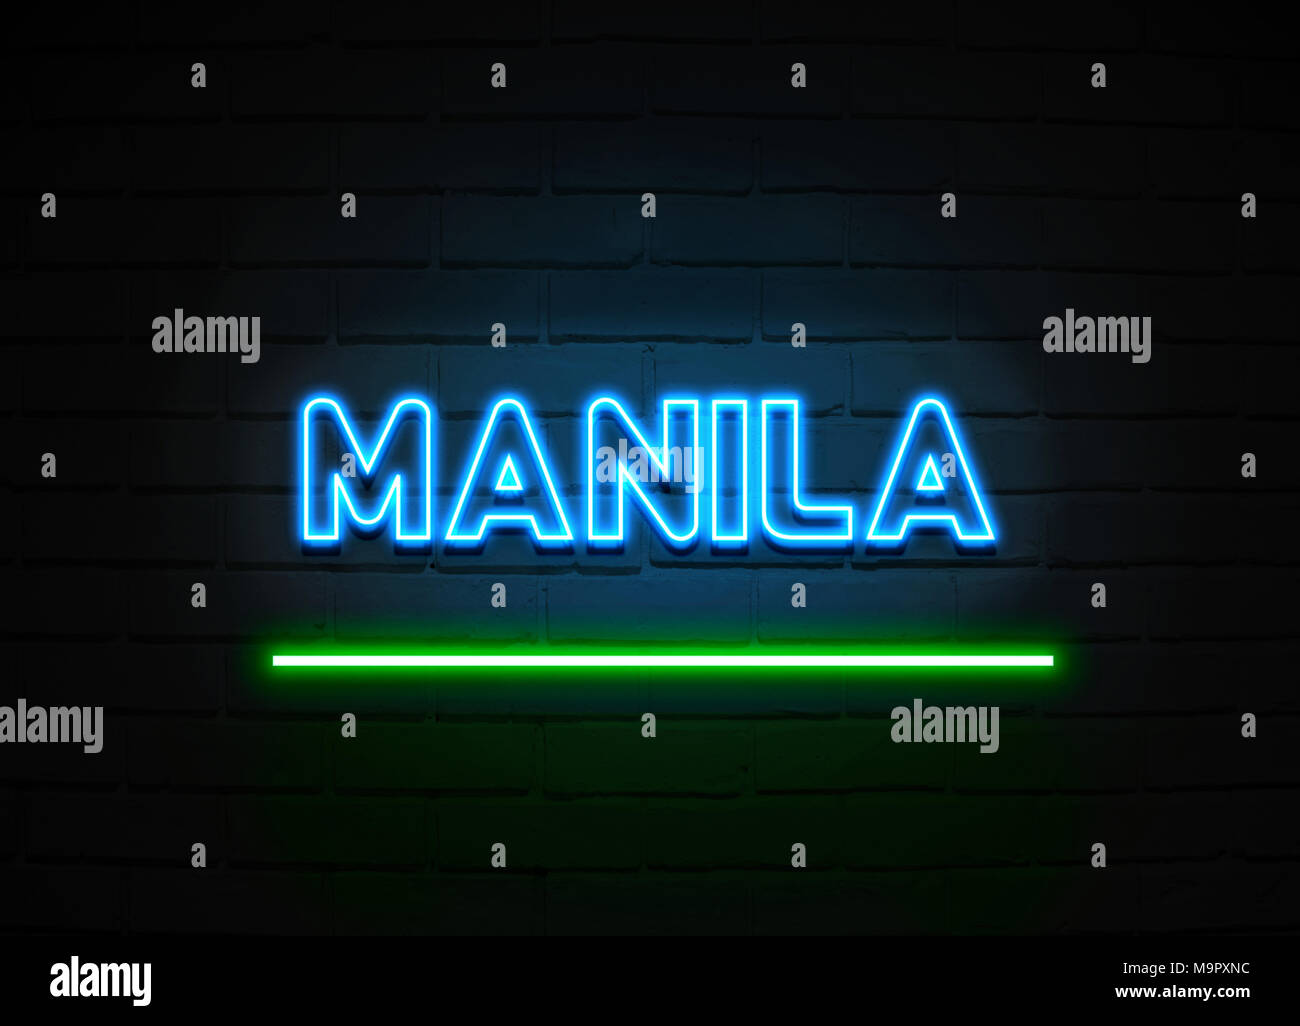 Manila neon sign - Glowing Neon Sign on brickwall wall - 3D rendered ...